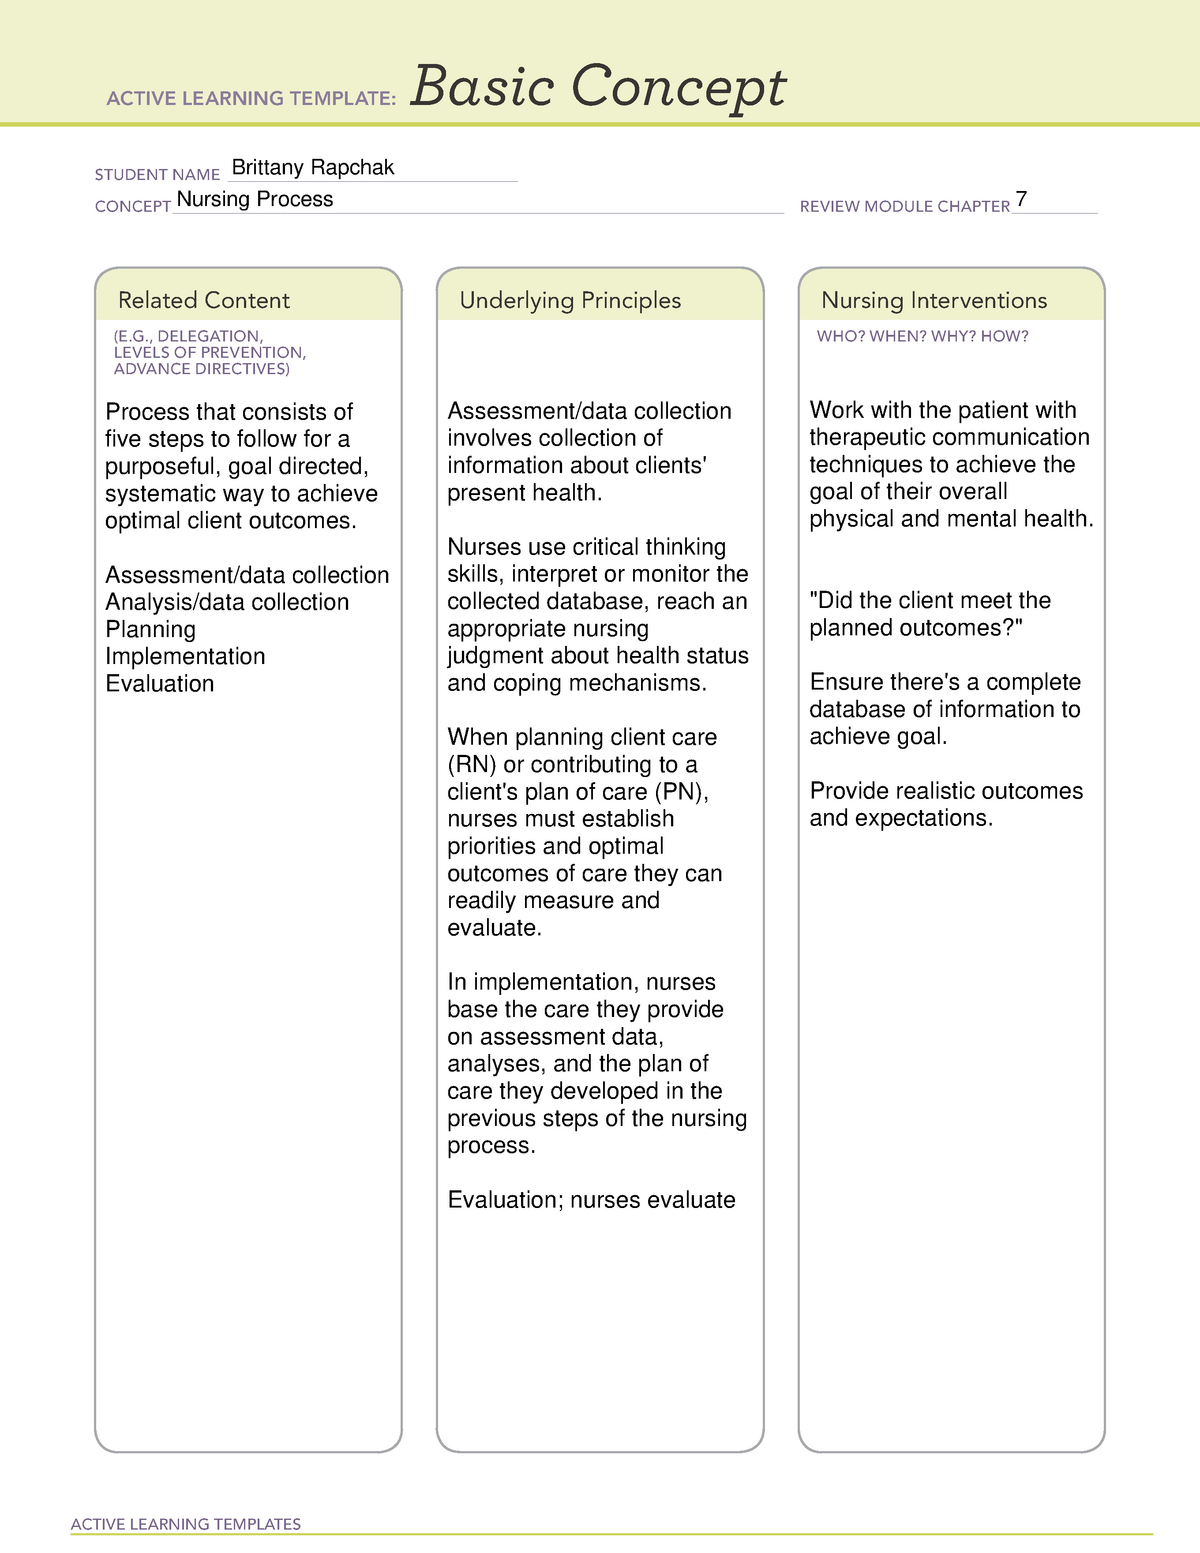 nursing-process-remediation-active-learning-templates-basic-concept